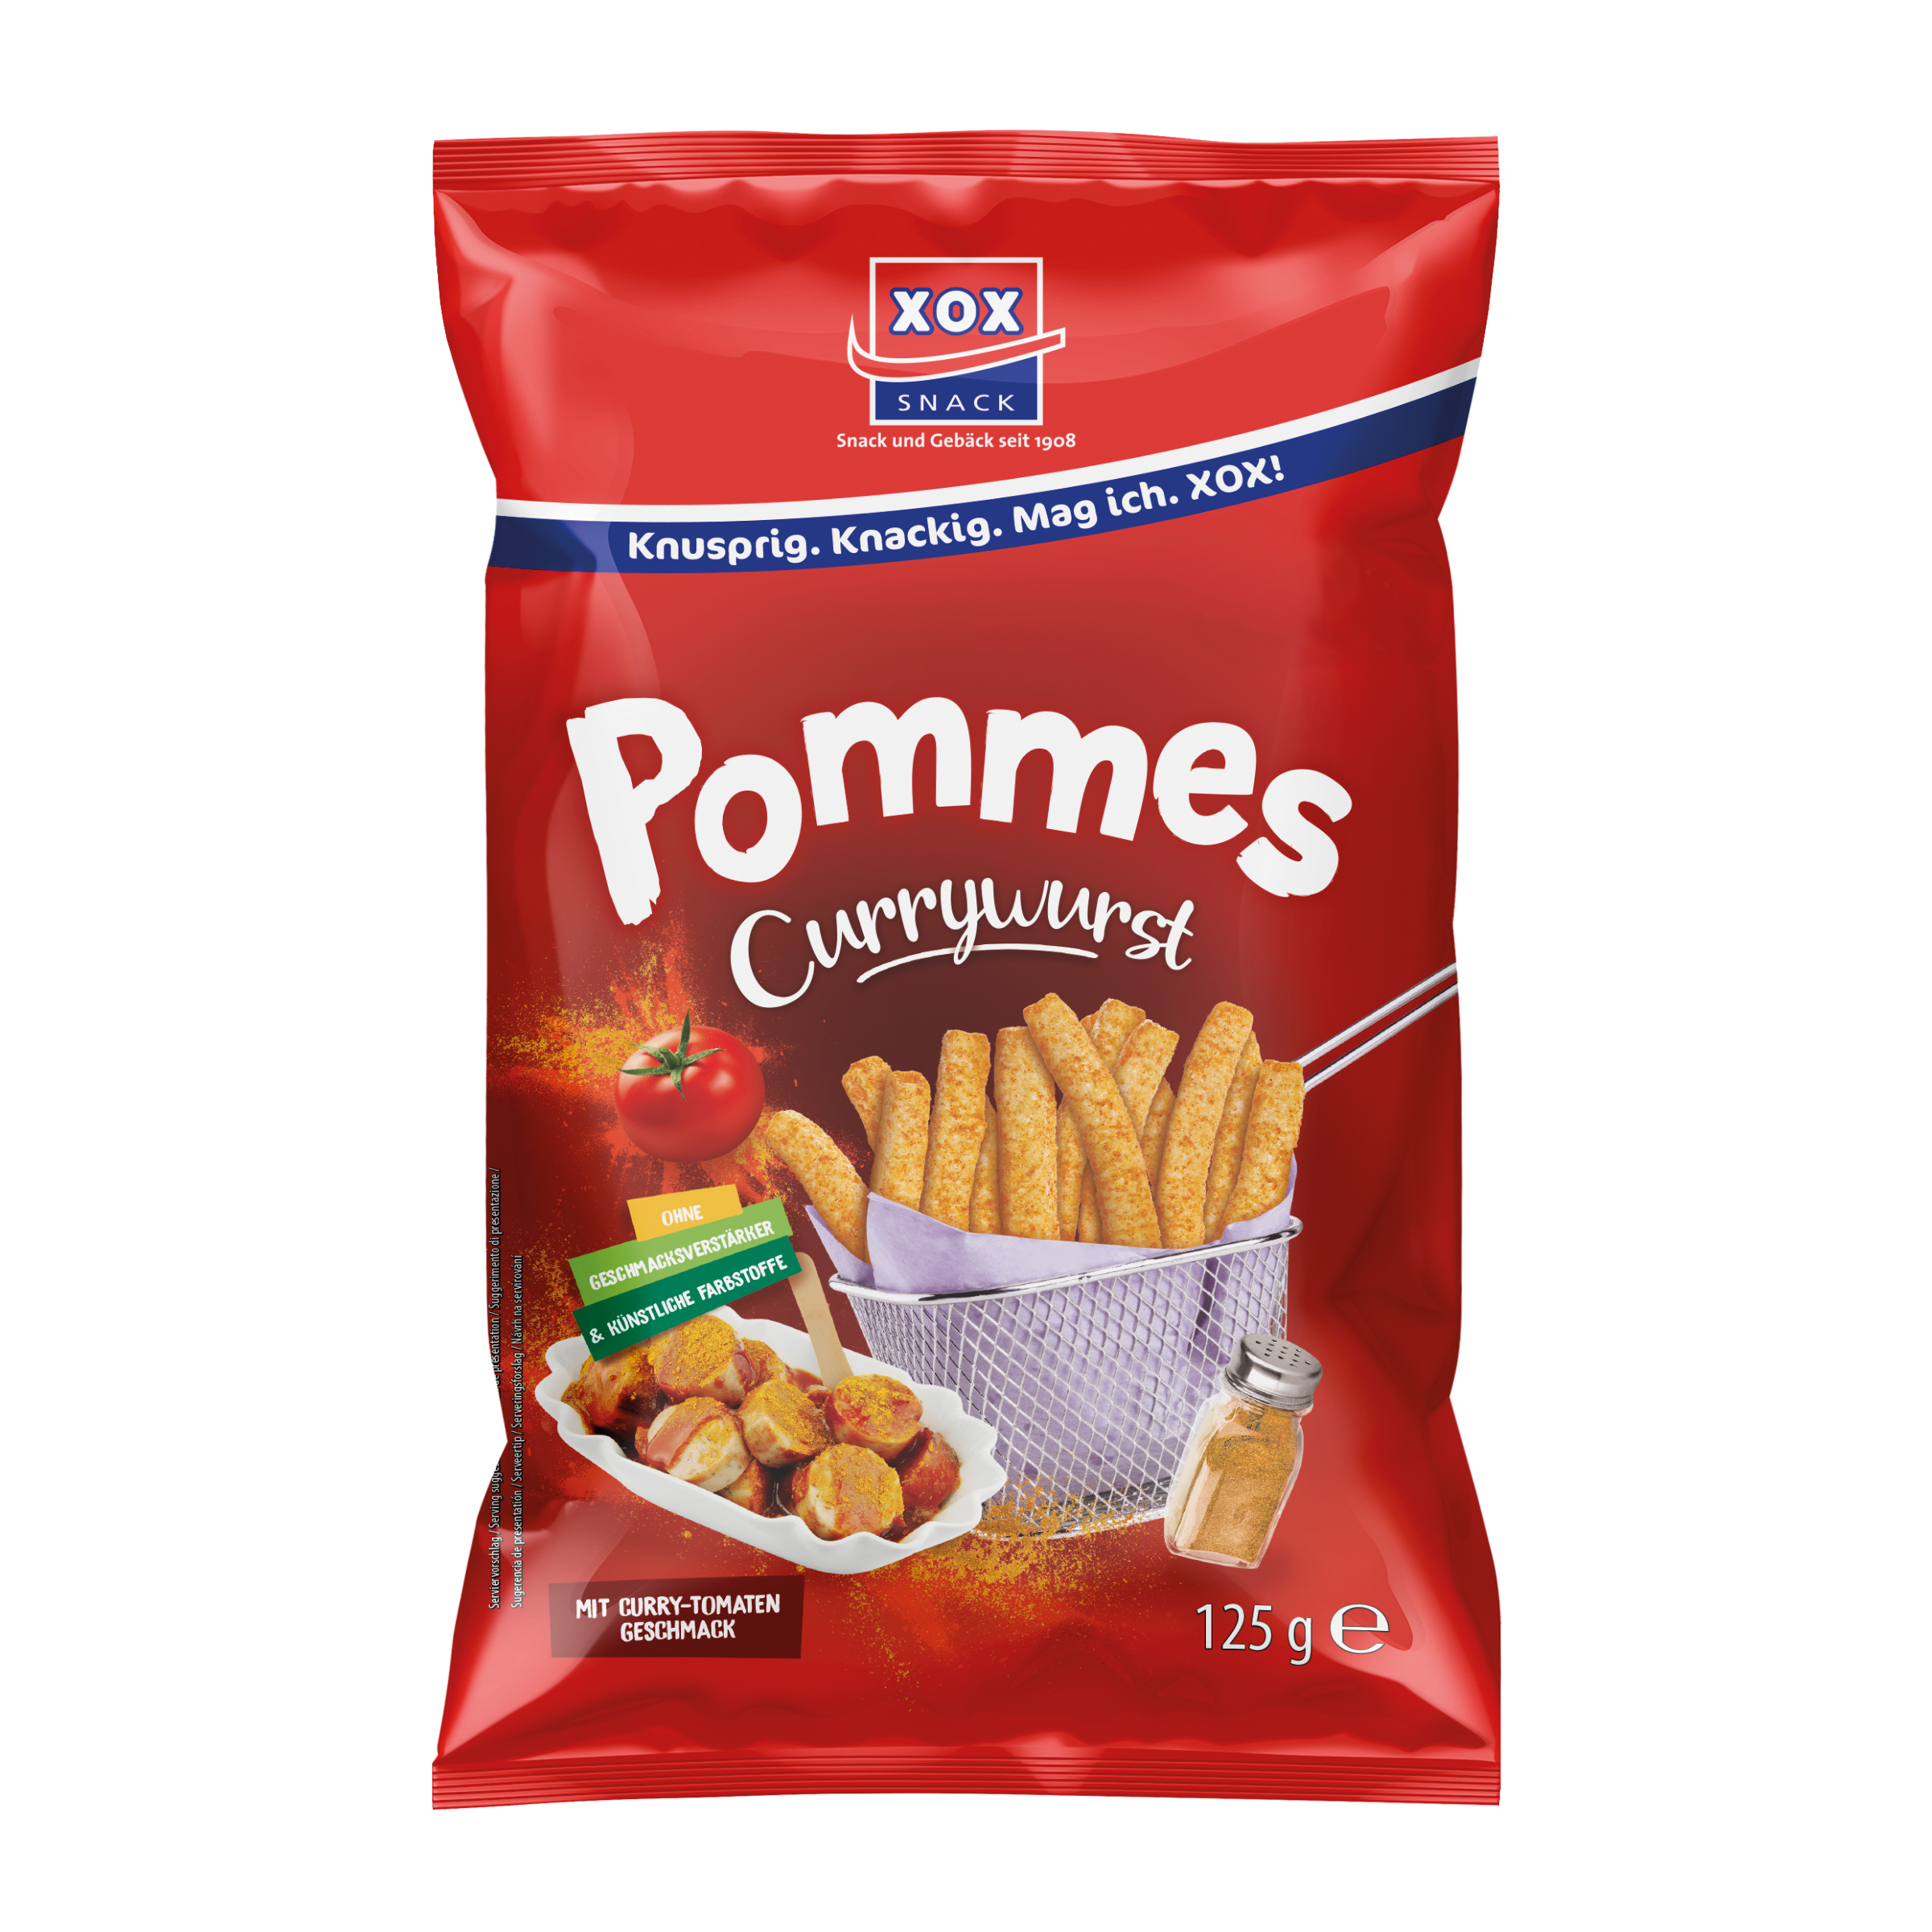 XOX Pommes - Currywurst 125g Group XOX